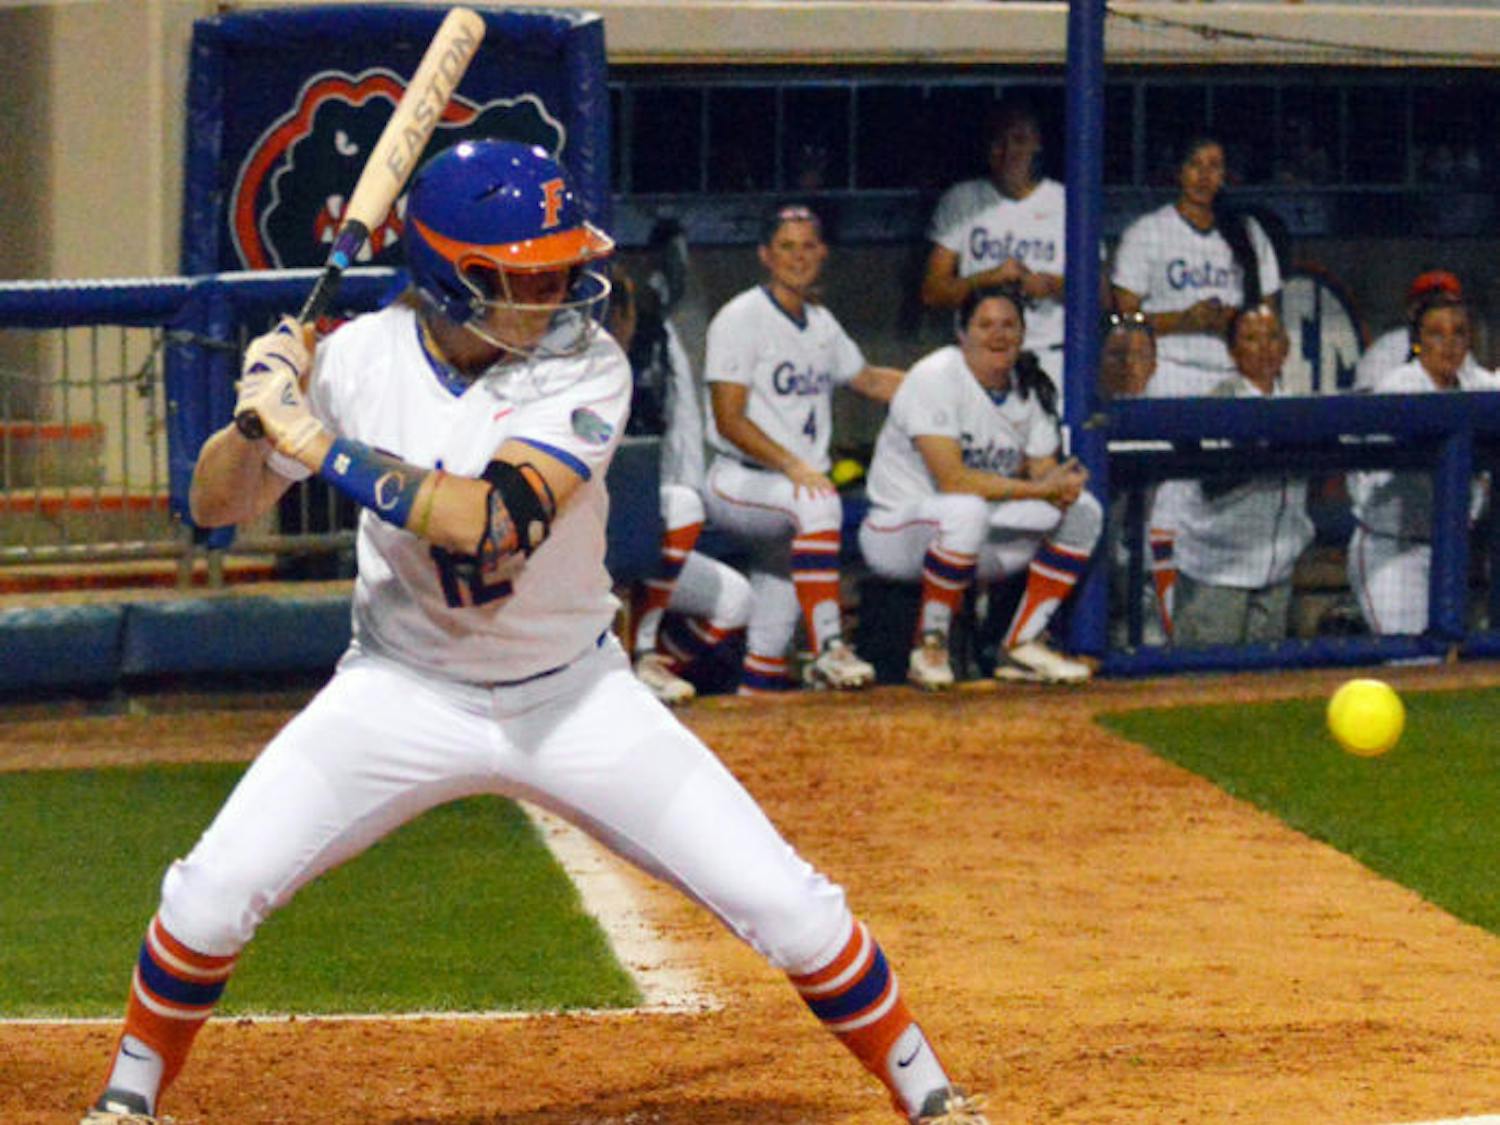 Taylore Fuller bats against Jacksonville during Florida’s 6-0 win on Feb. 19, 2014, at Katie Seashole Pressly Stadium. Fuller helped lead the Gators to a 7-0 victory over Hofstra on Saturday.